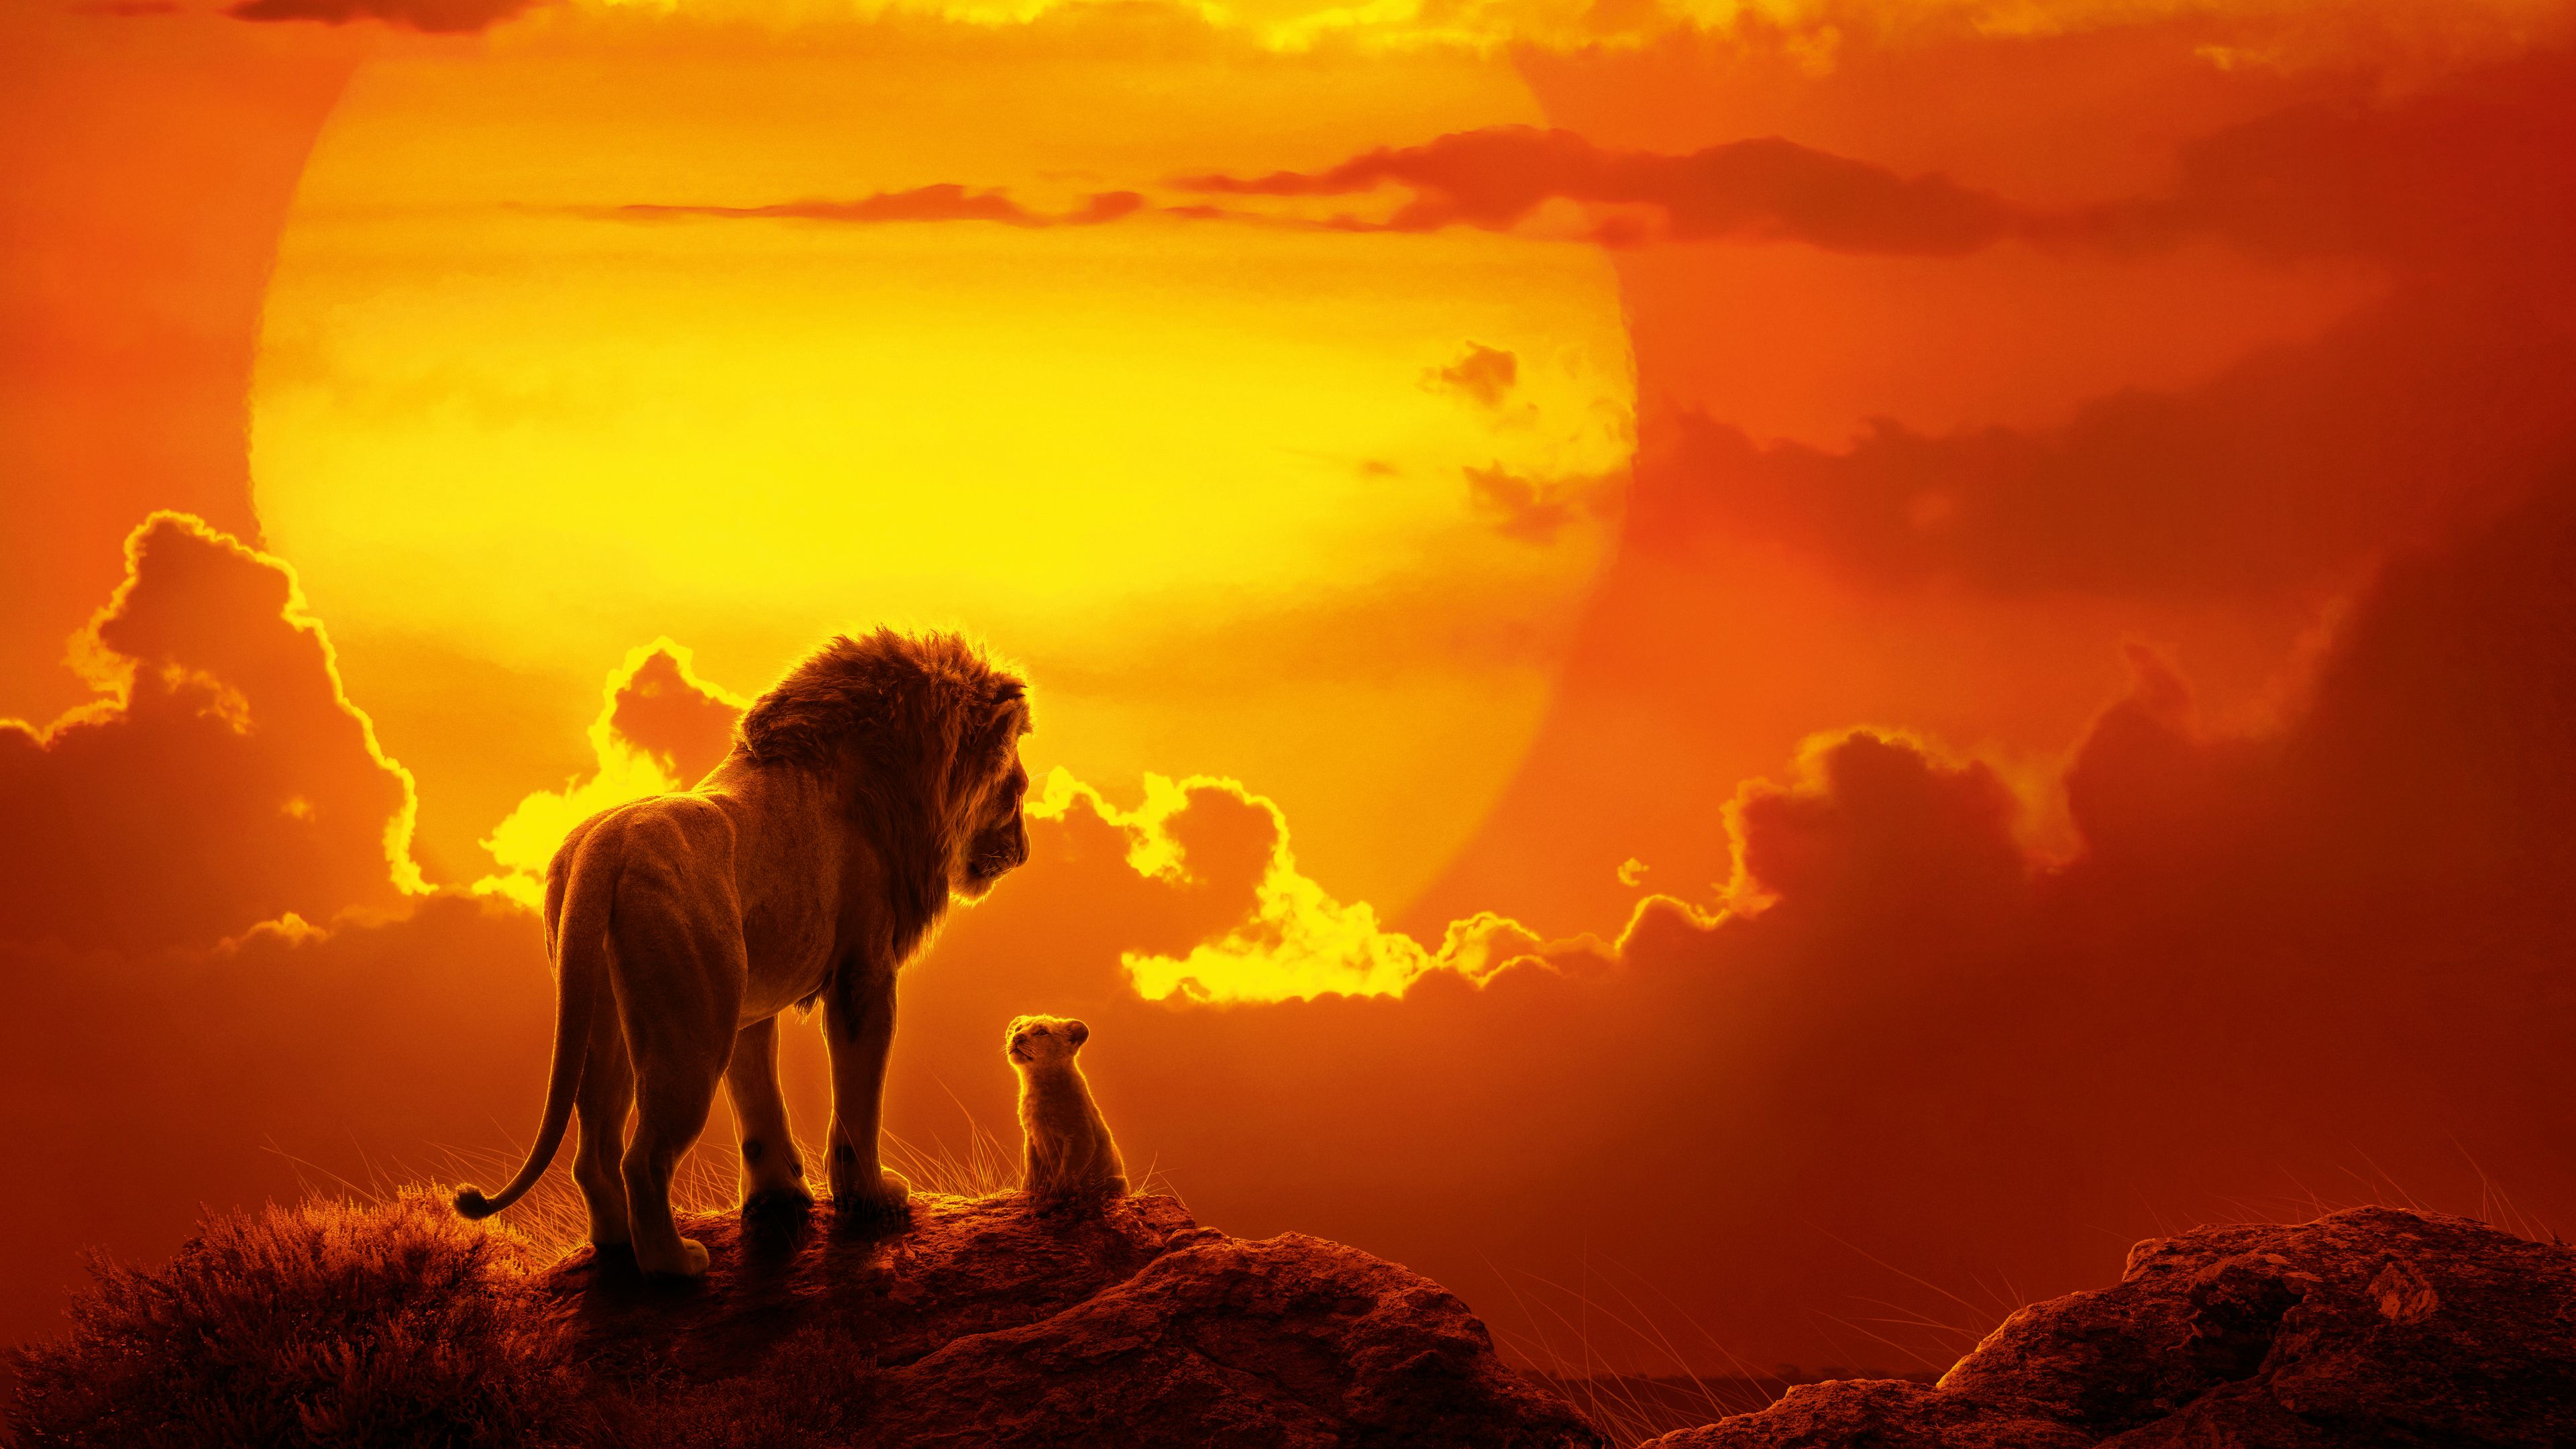 Wallpaper 4k The Lion King Movie 2019 Movies Wallpaper, 4k Wallpaper, 5k Wallpaper, 8k Wallpaper, Disney Wallpaper, Hd Wallpaper, Lion Wallpaper, Movies Wallpaper, Simba Wallpaper, The Lion King Wallpaper